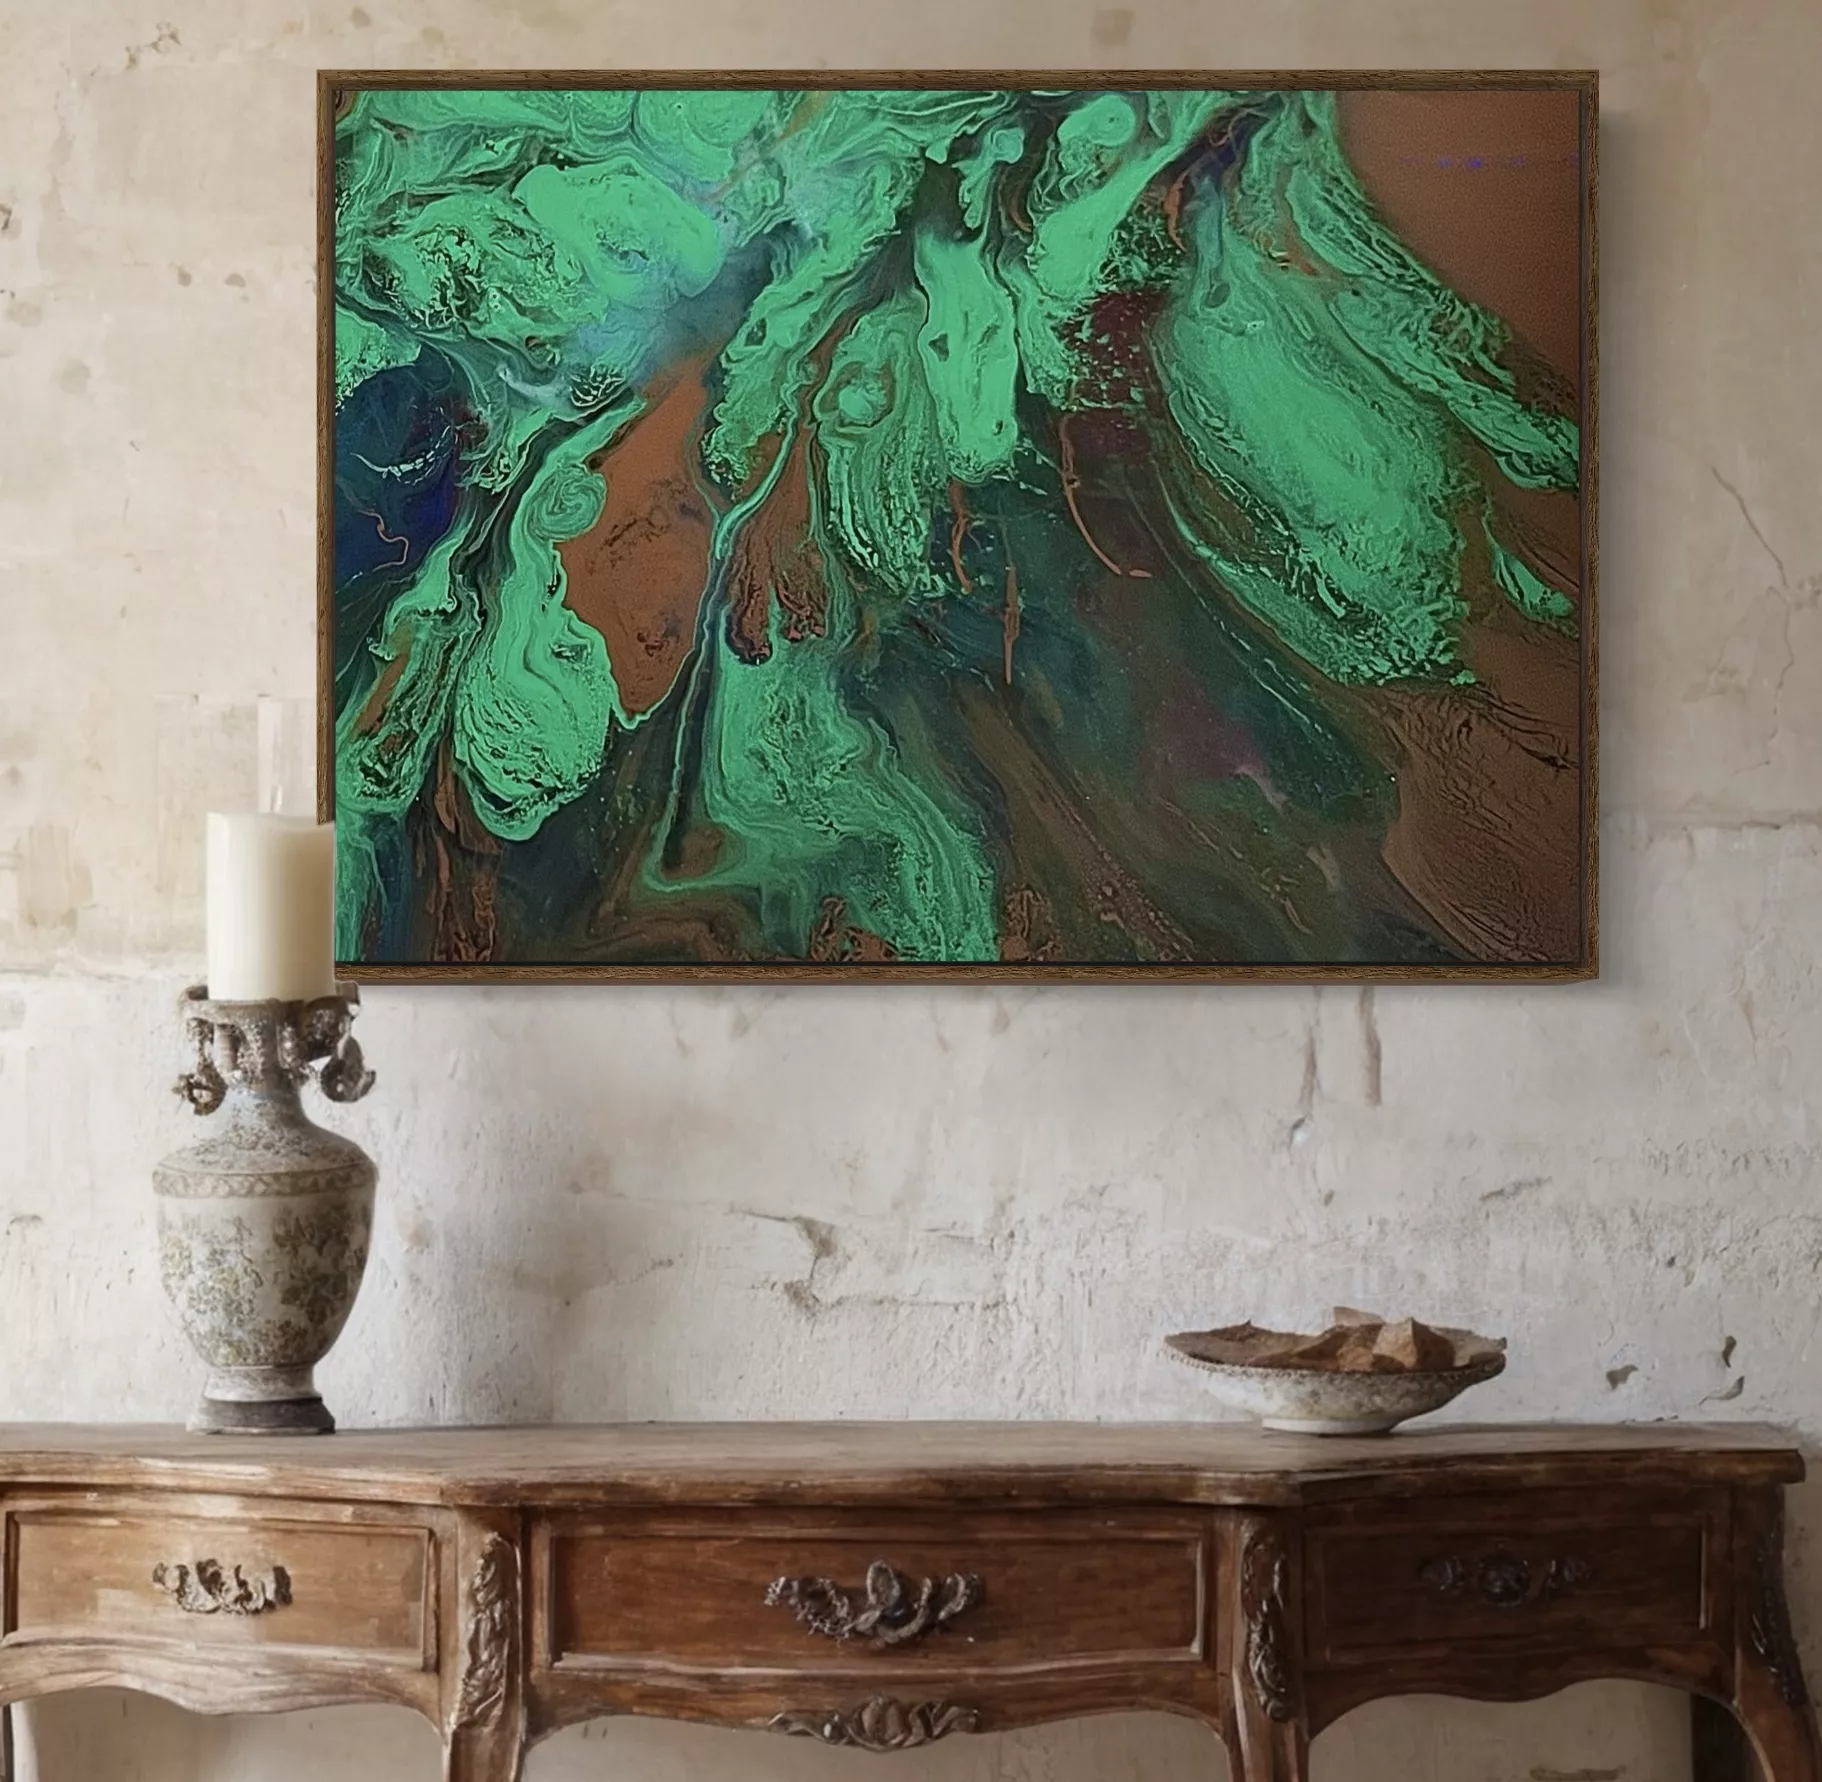 Verdigris Dreams on a light wall above a table with vase and bowl by Simone woods Abstract Artist.